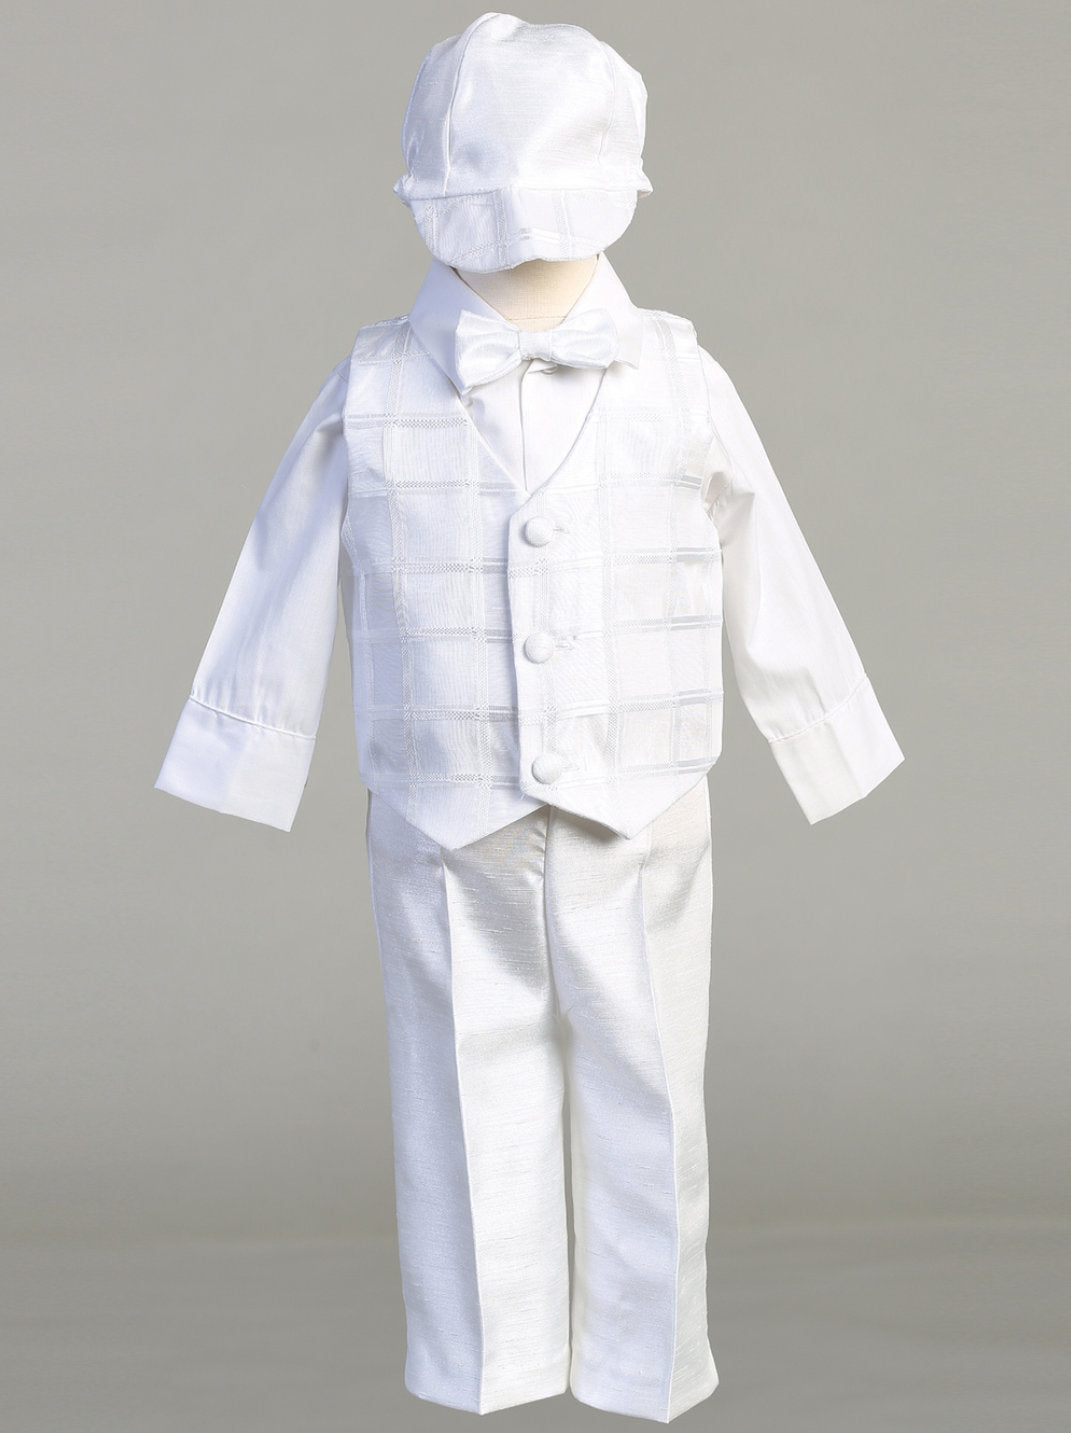 Scott - Baby Boys Baptism & Christening Outfit w/ Pants, Blessing Suit